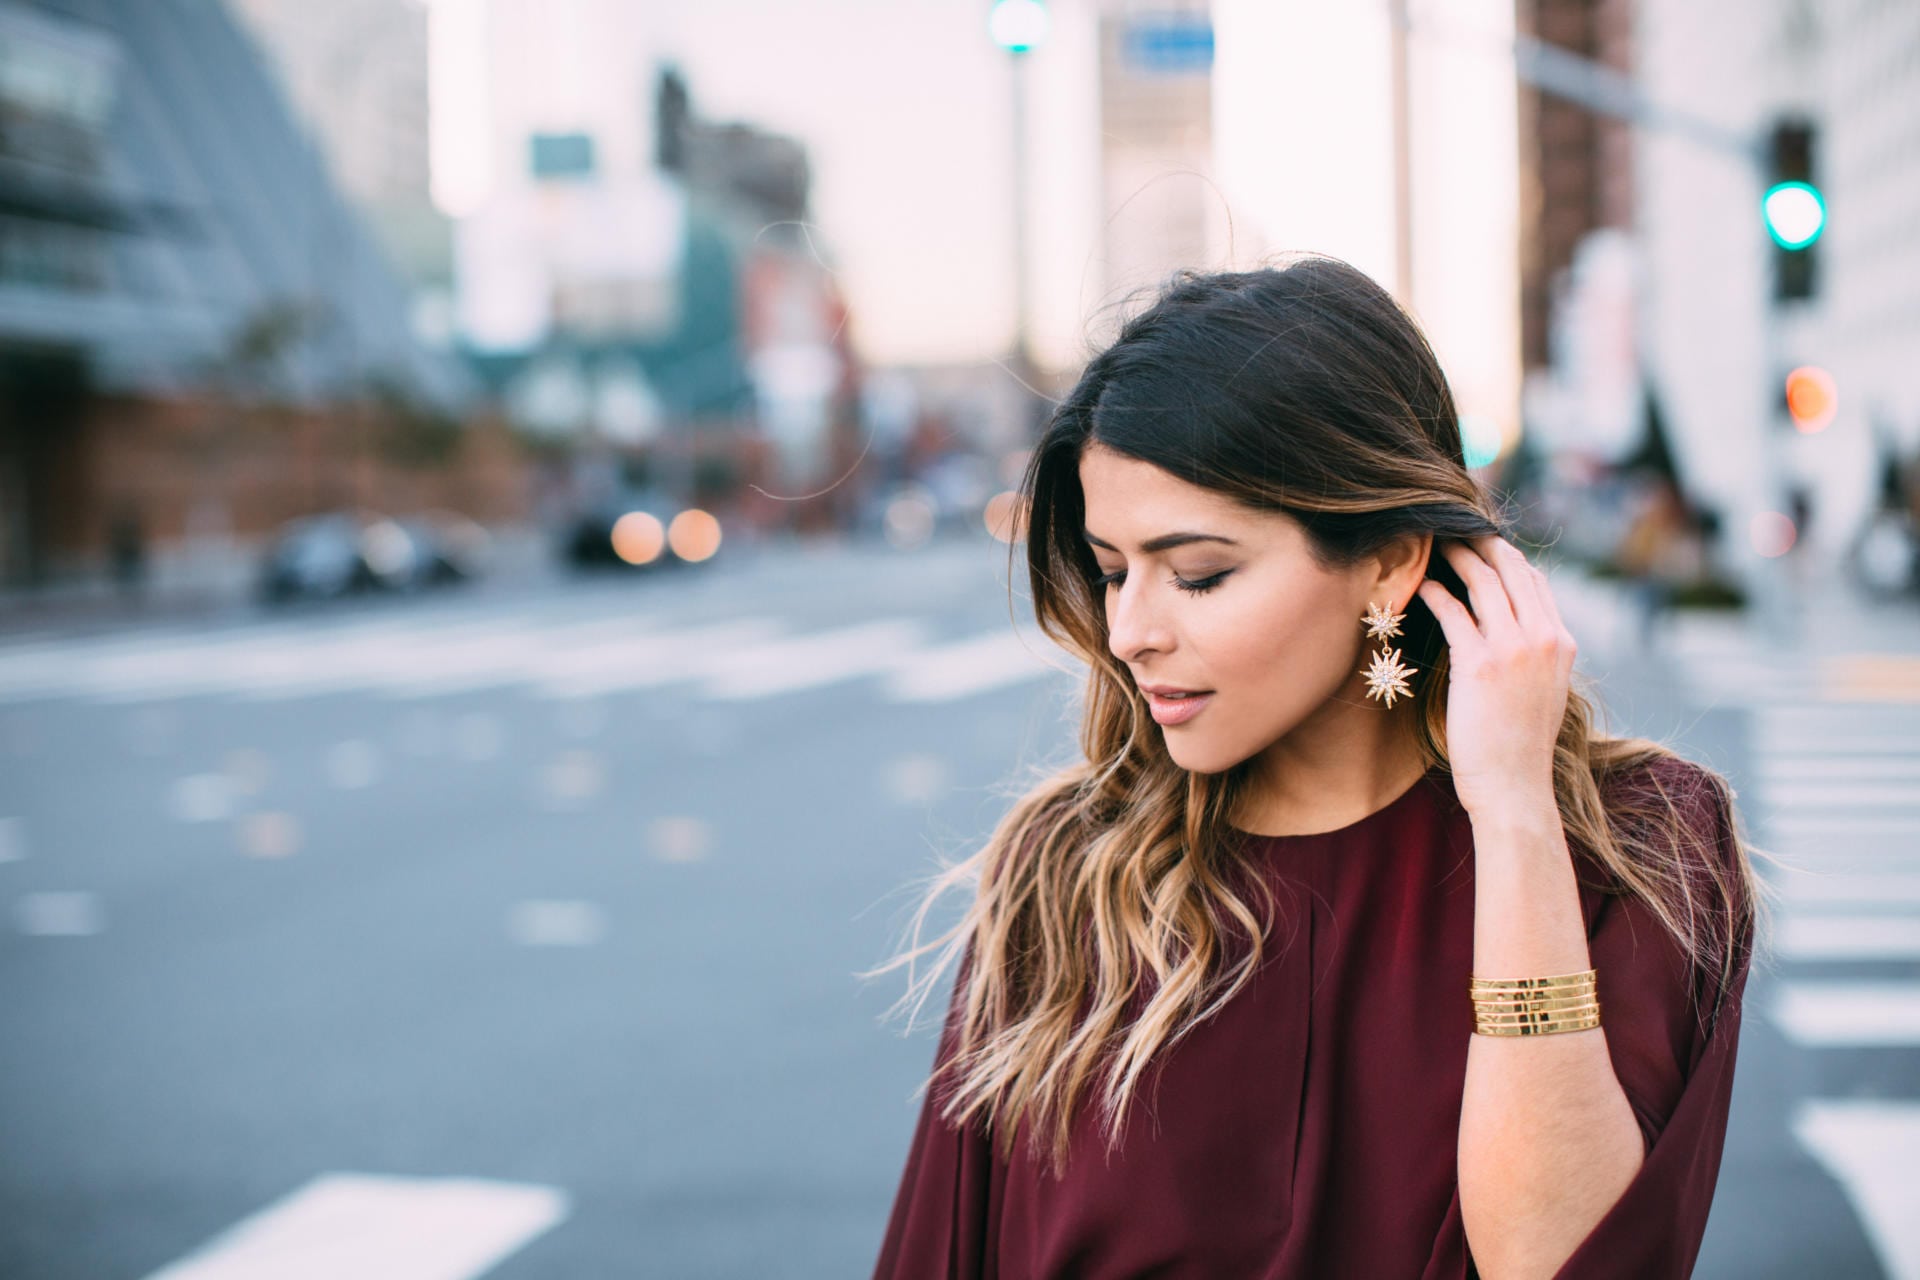 Keepsake step back burgundy dress, star earrings, black over-knee-boots, holiday party look | The Girl From Panama